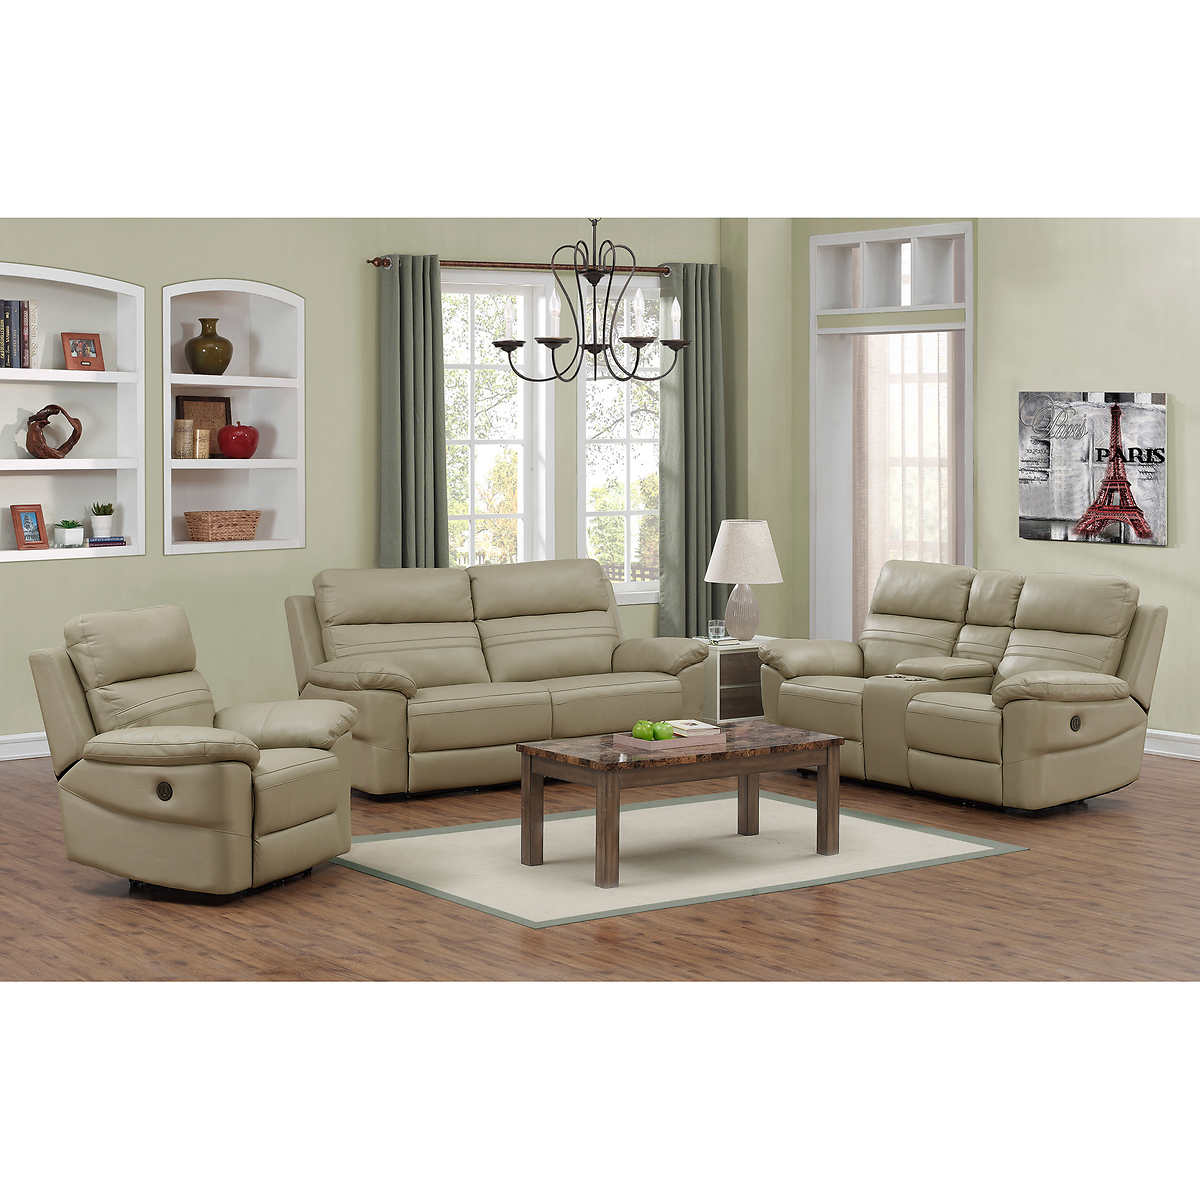 Rockhill Beige 3 Piece Top Grain Leather Power Reclining Living Room Set